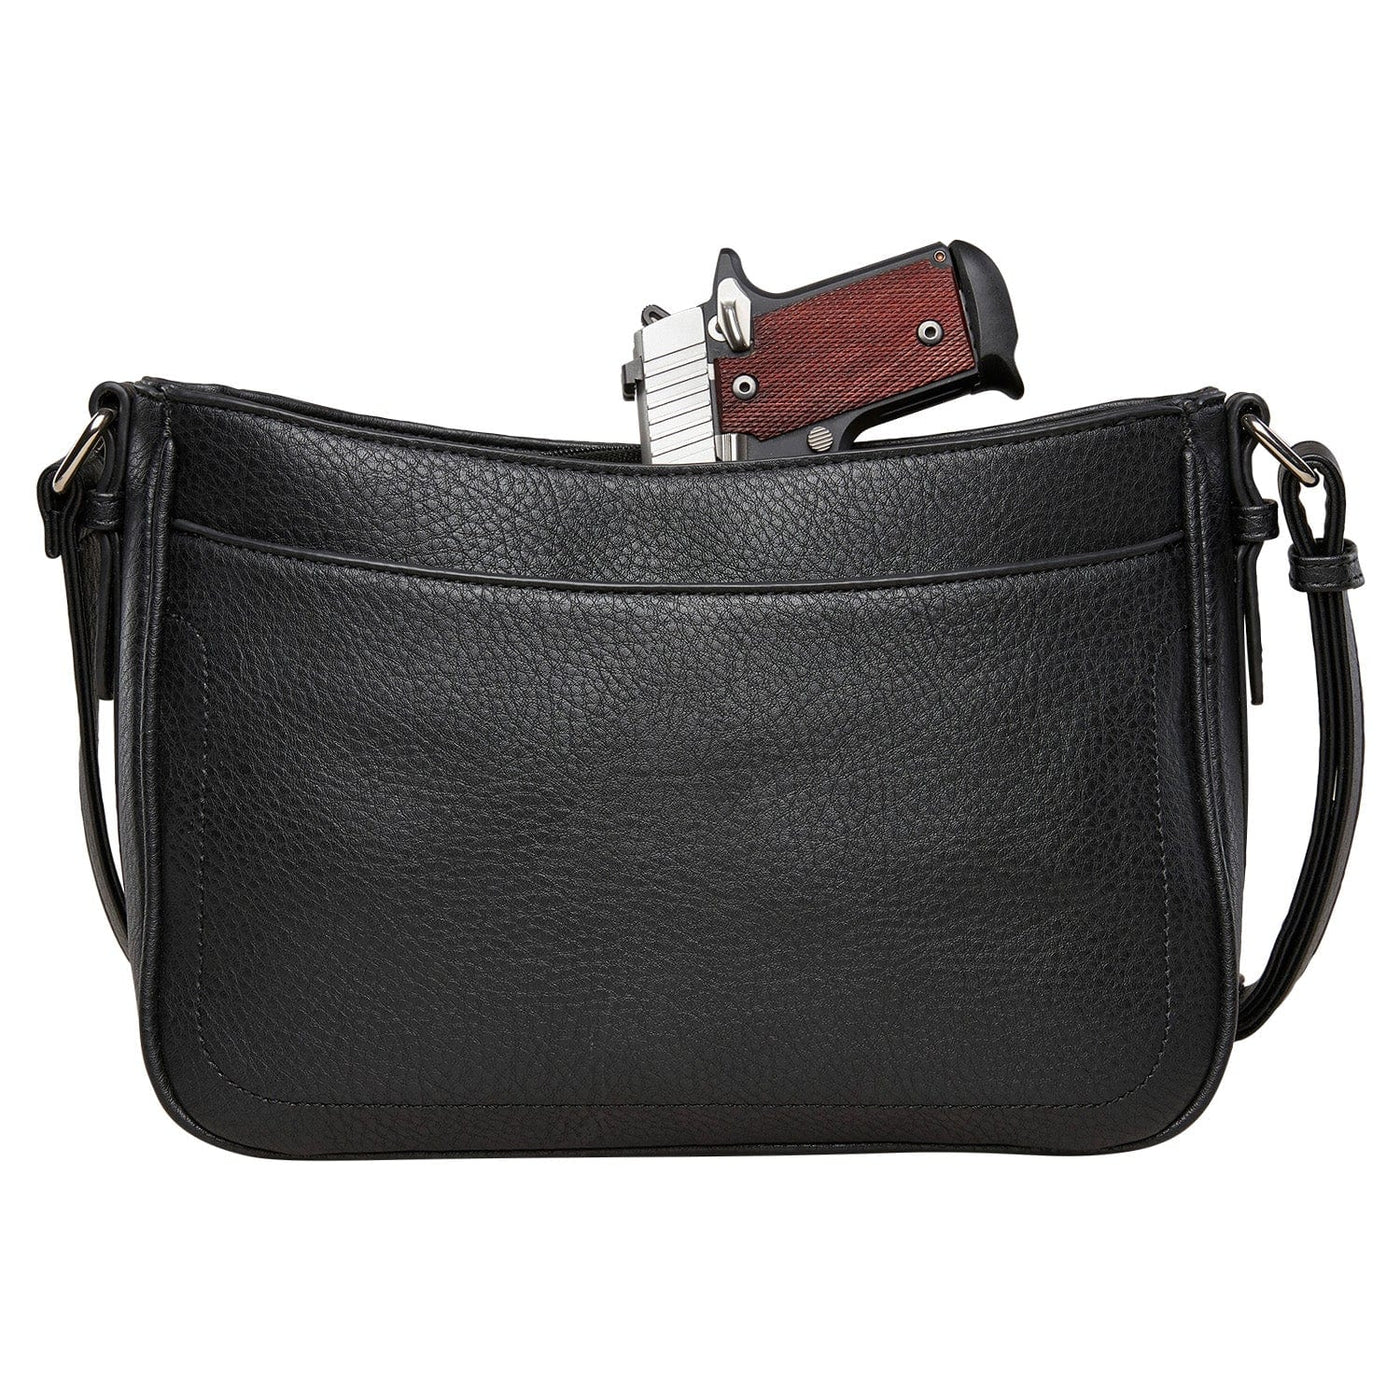 Concealed Carry Emery Crossbody Bag with RFID Slim Wallet